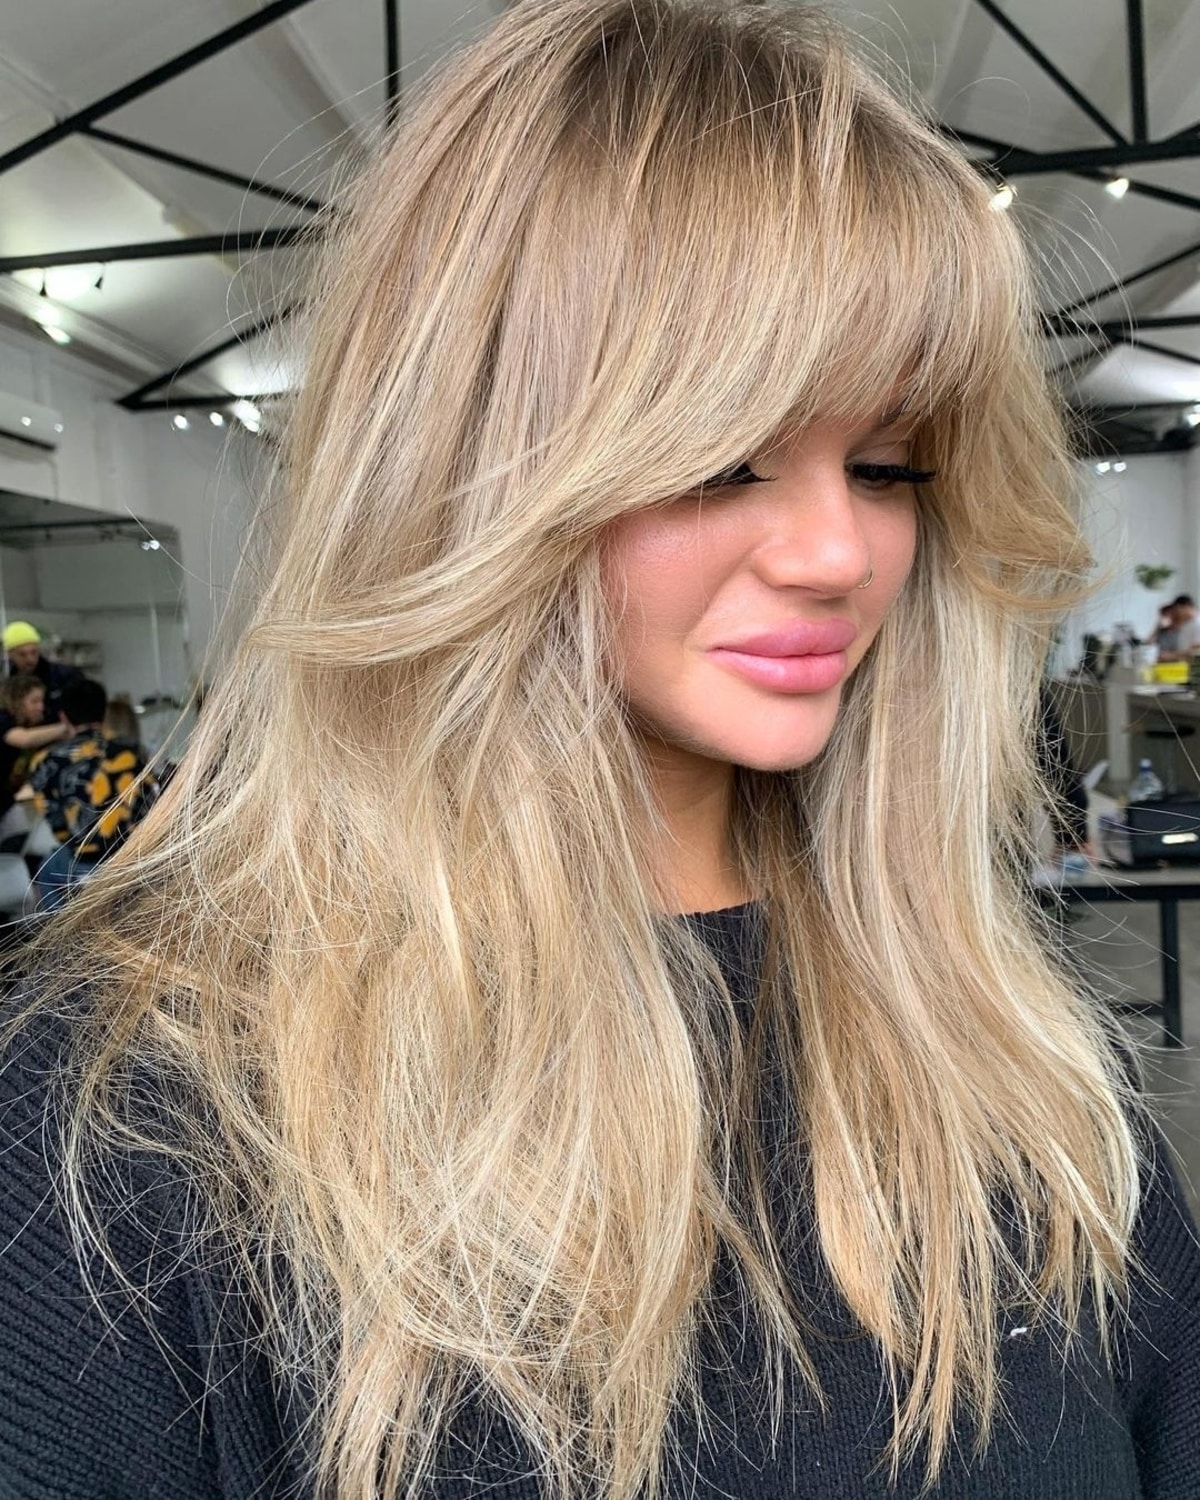 Long Blonde Hair with Bangs and Short Layers